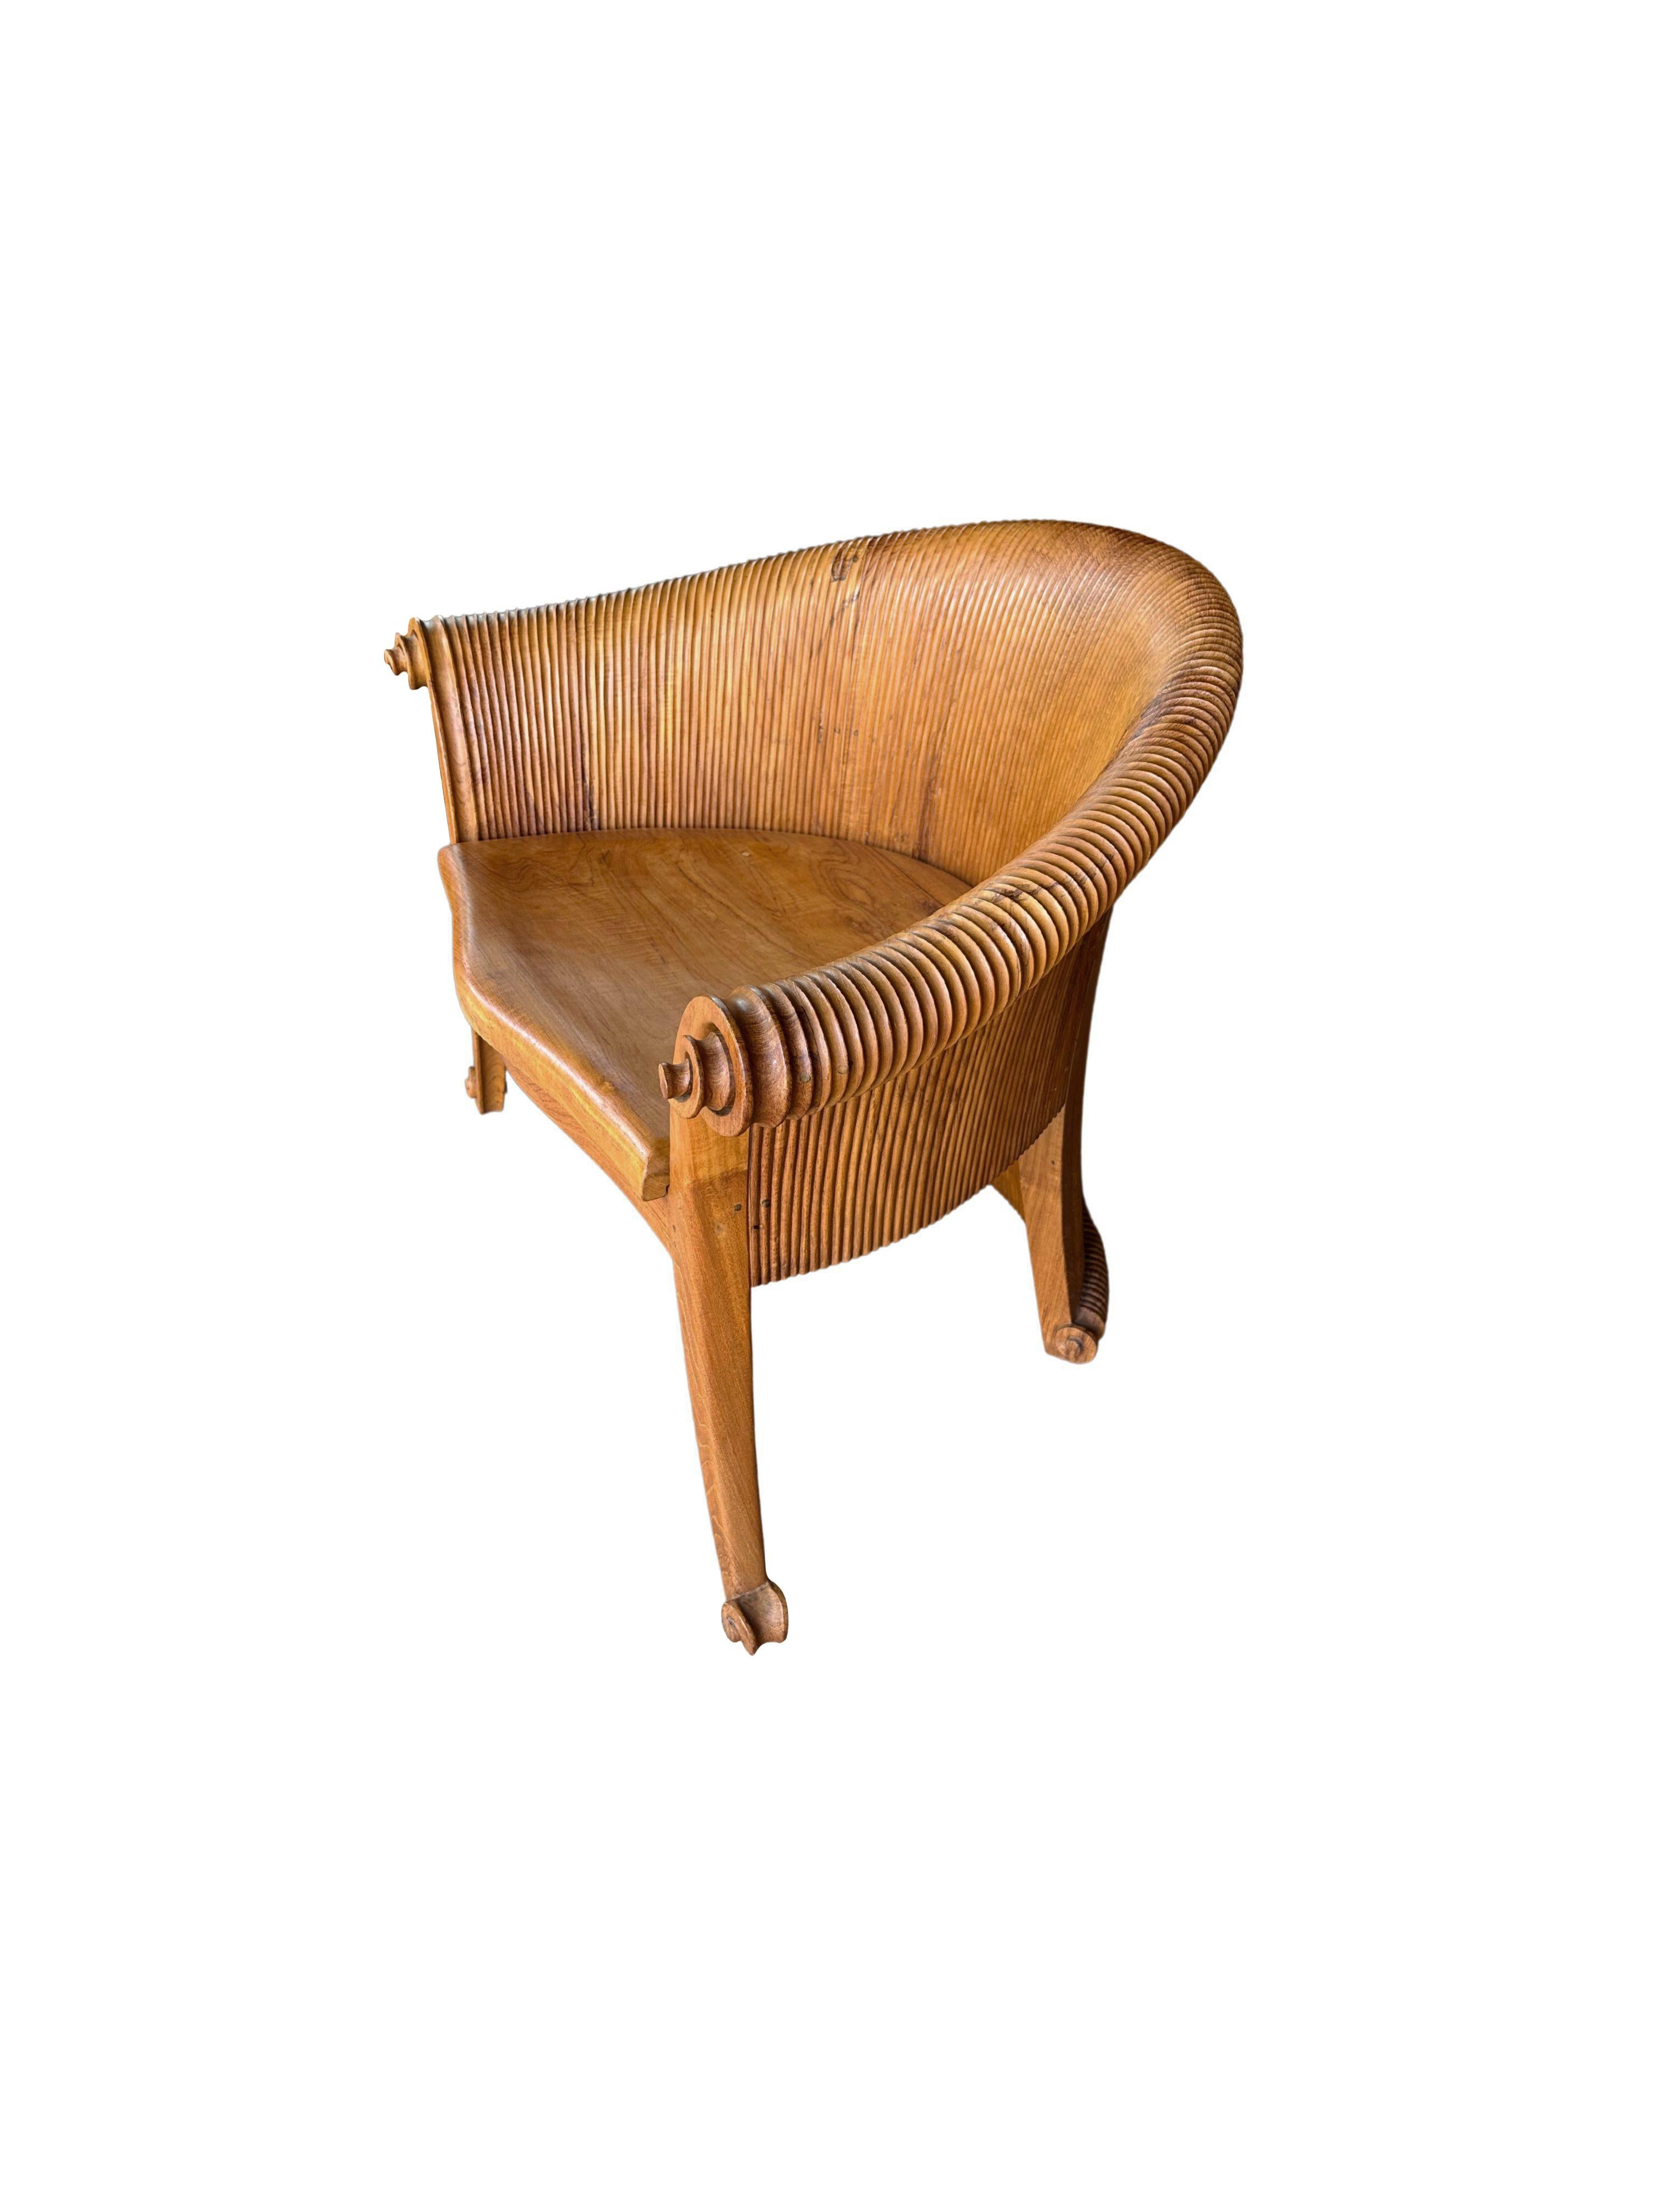 Contemporary Sculptural Teak Wood Chair with Carved Detailing For Sale